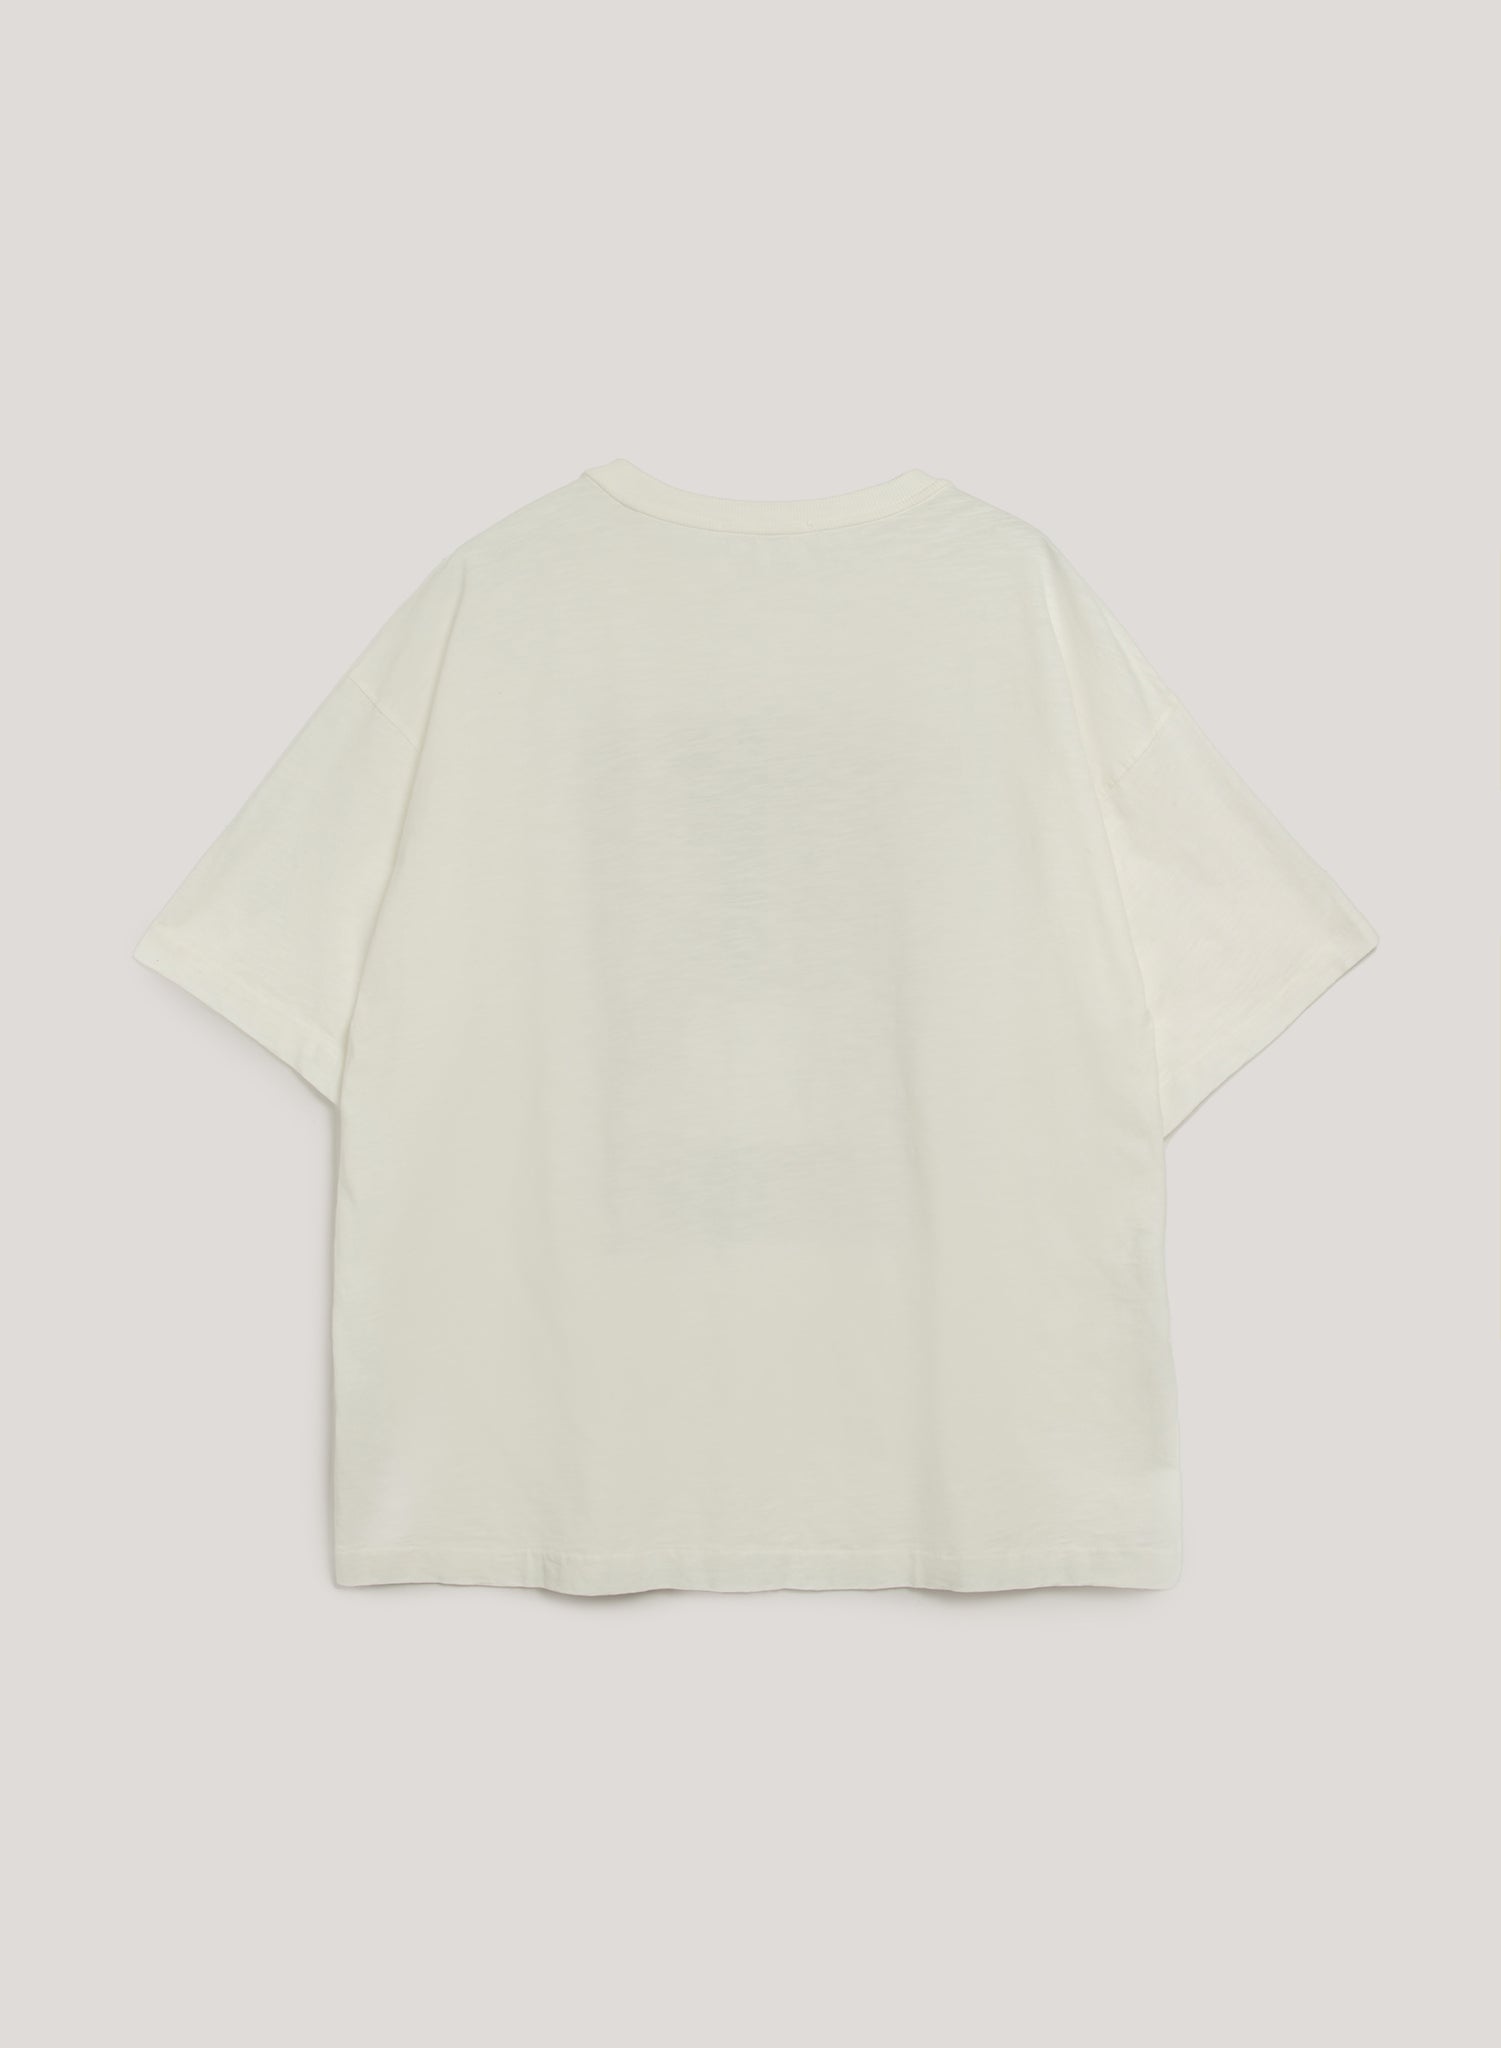 YMC It’s Out There Tee White